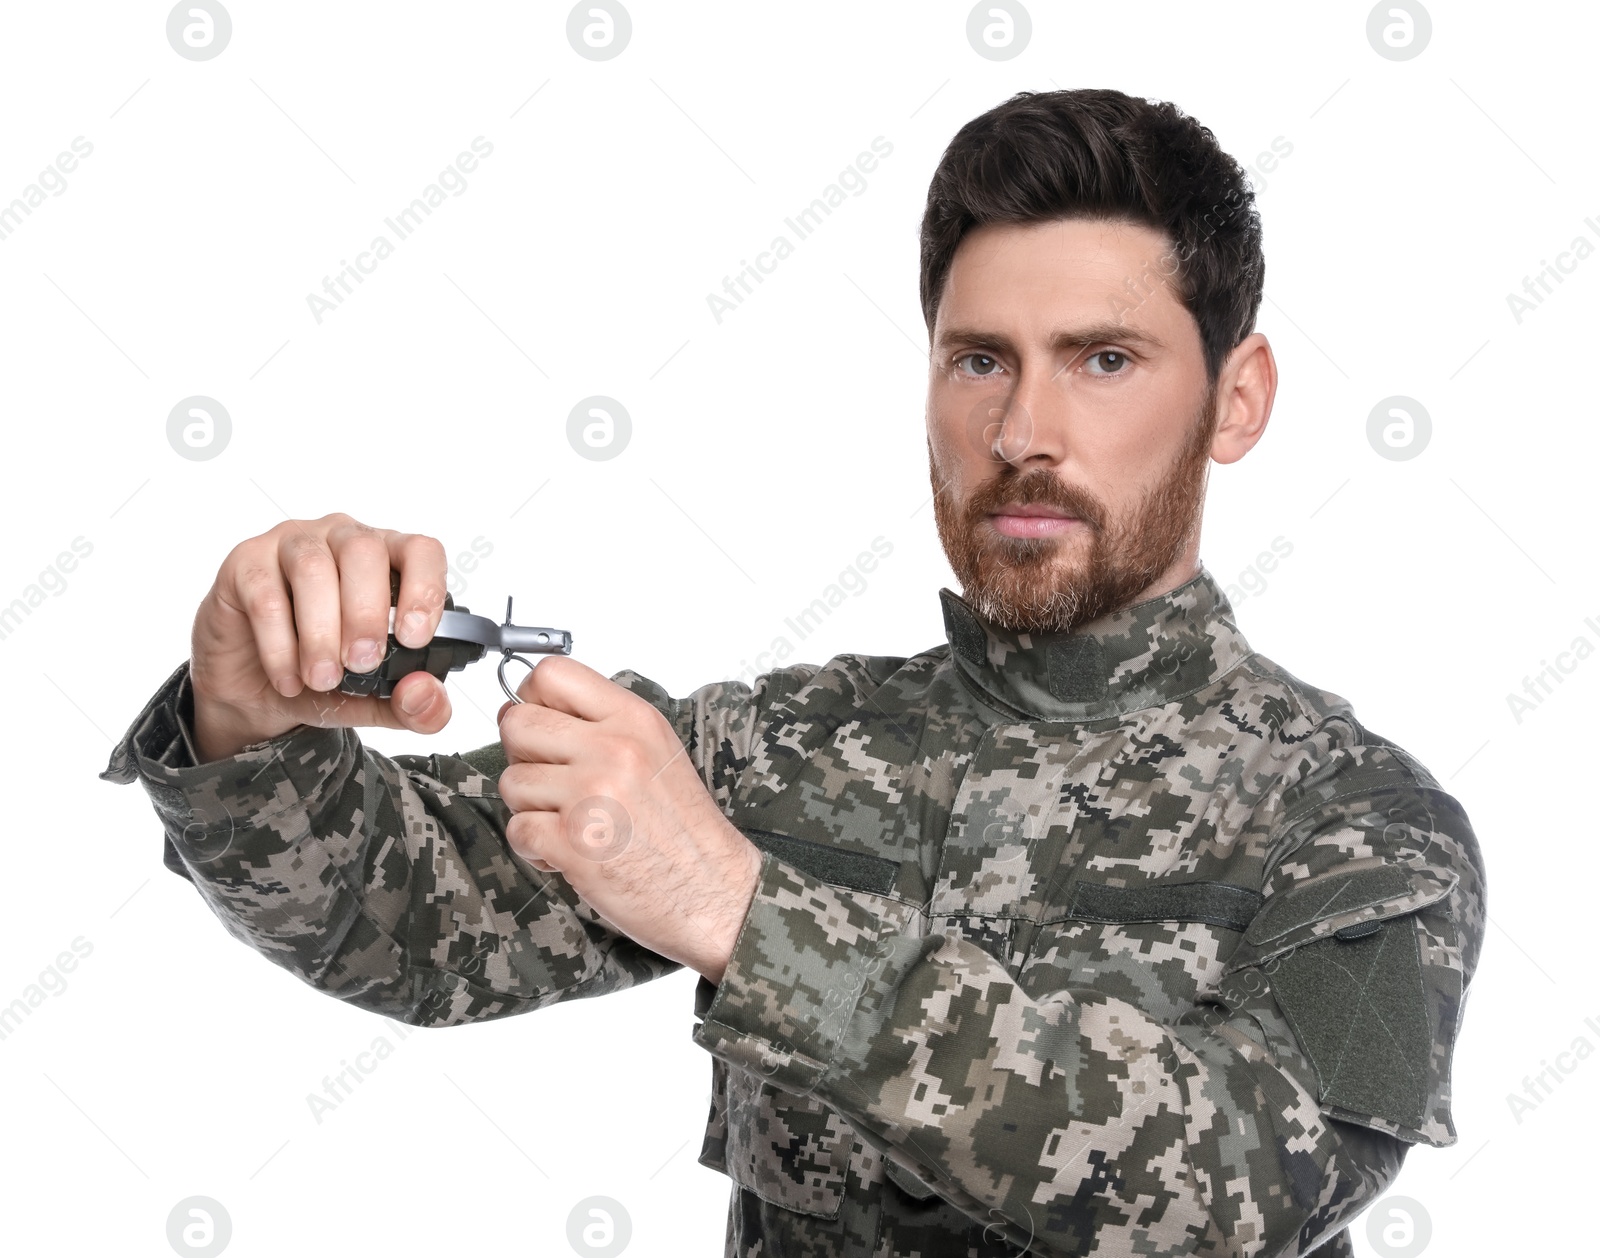 Photo of Soldier pulling safety pin out of hand grenade on white background. Military service